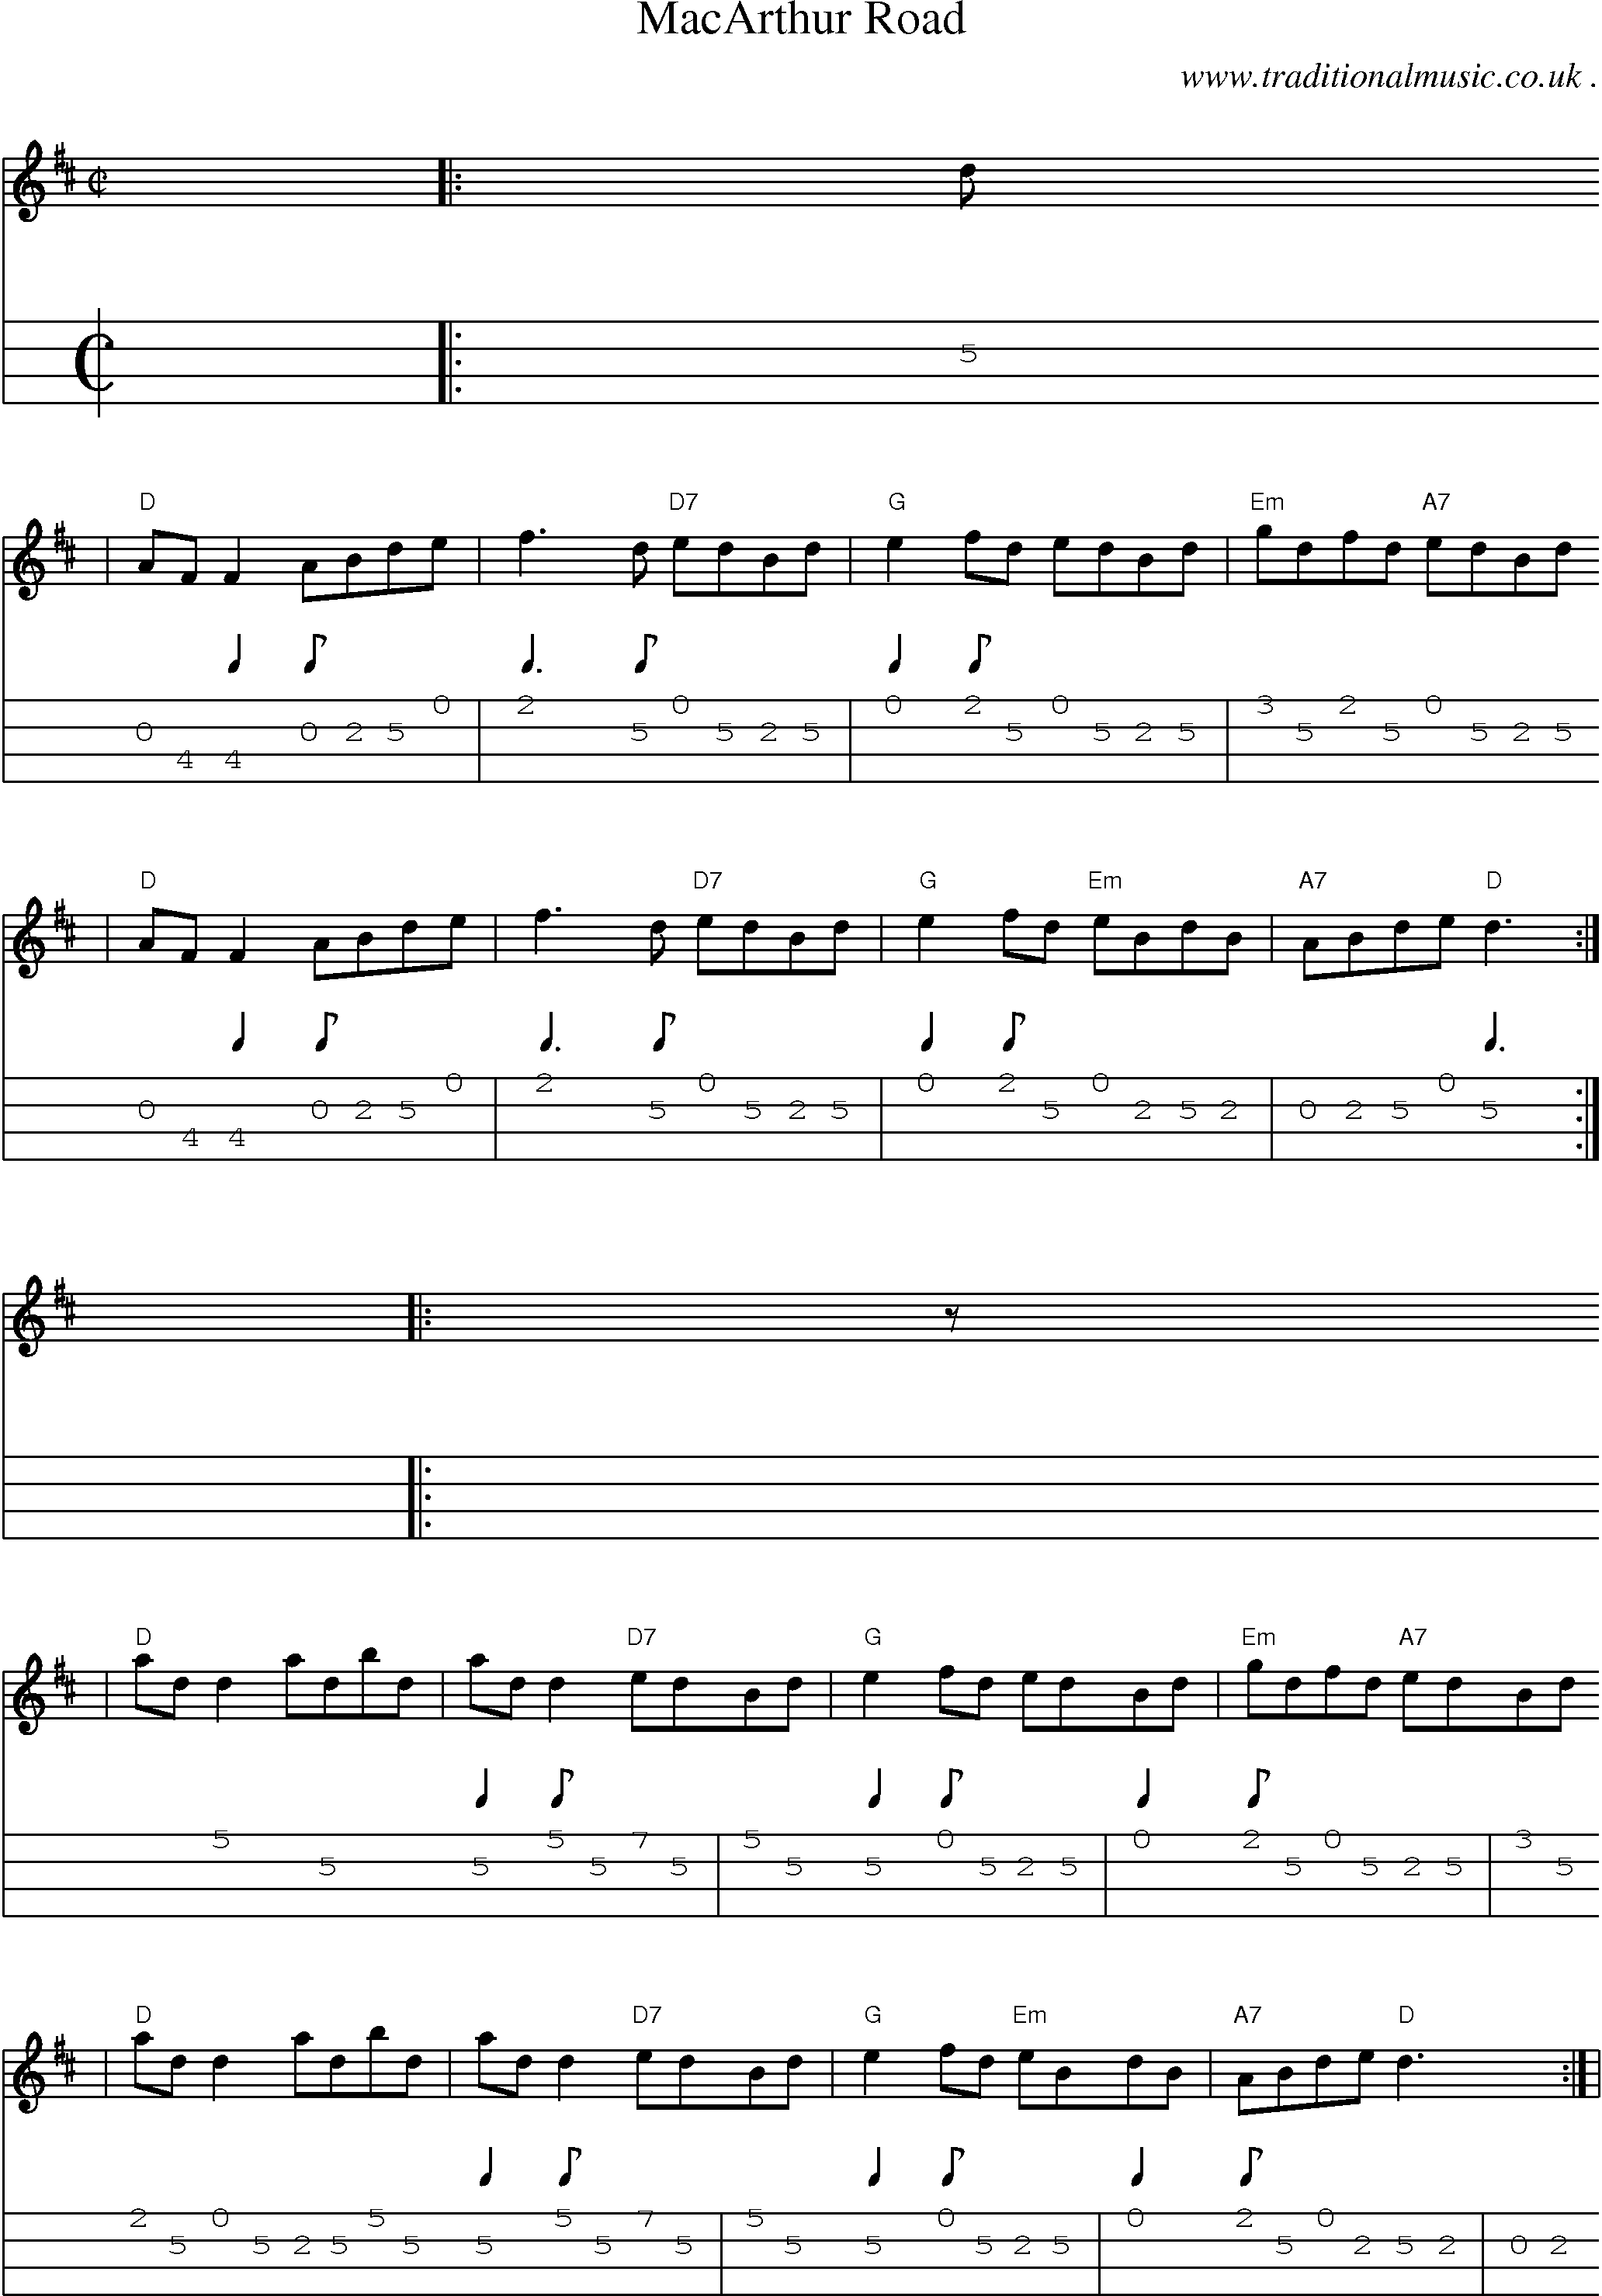 Music Score and Mandolin Tabs for Macarthur Road